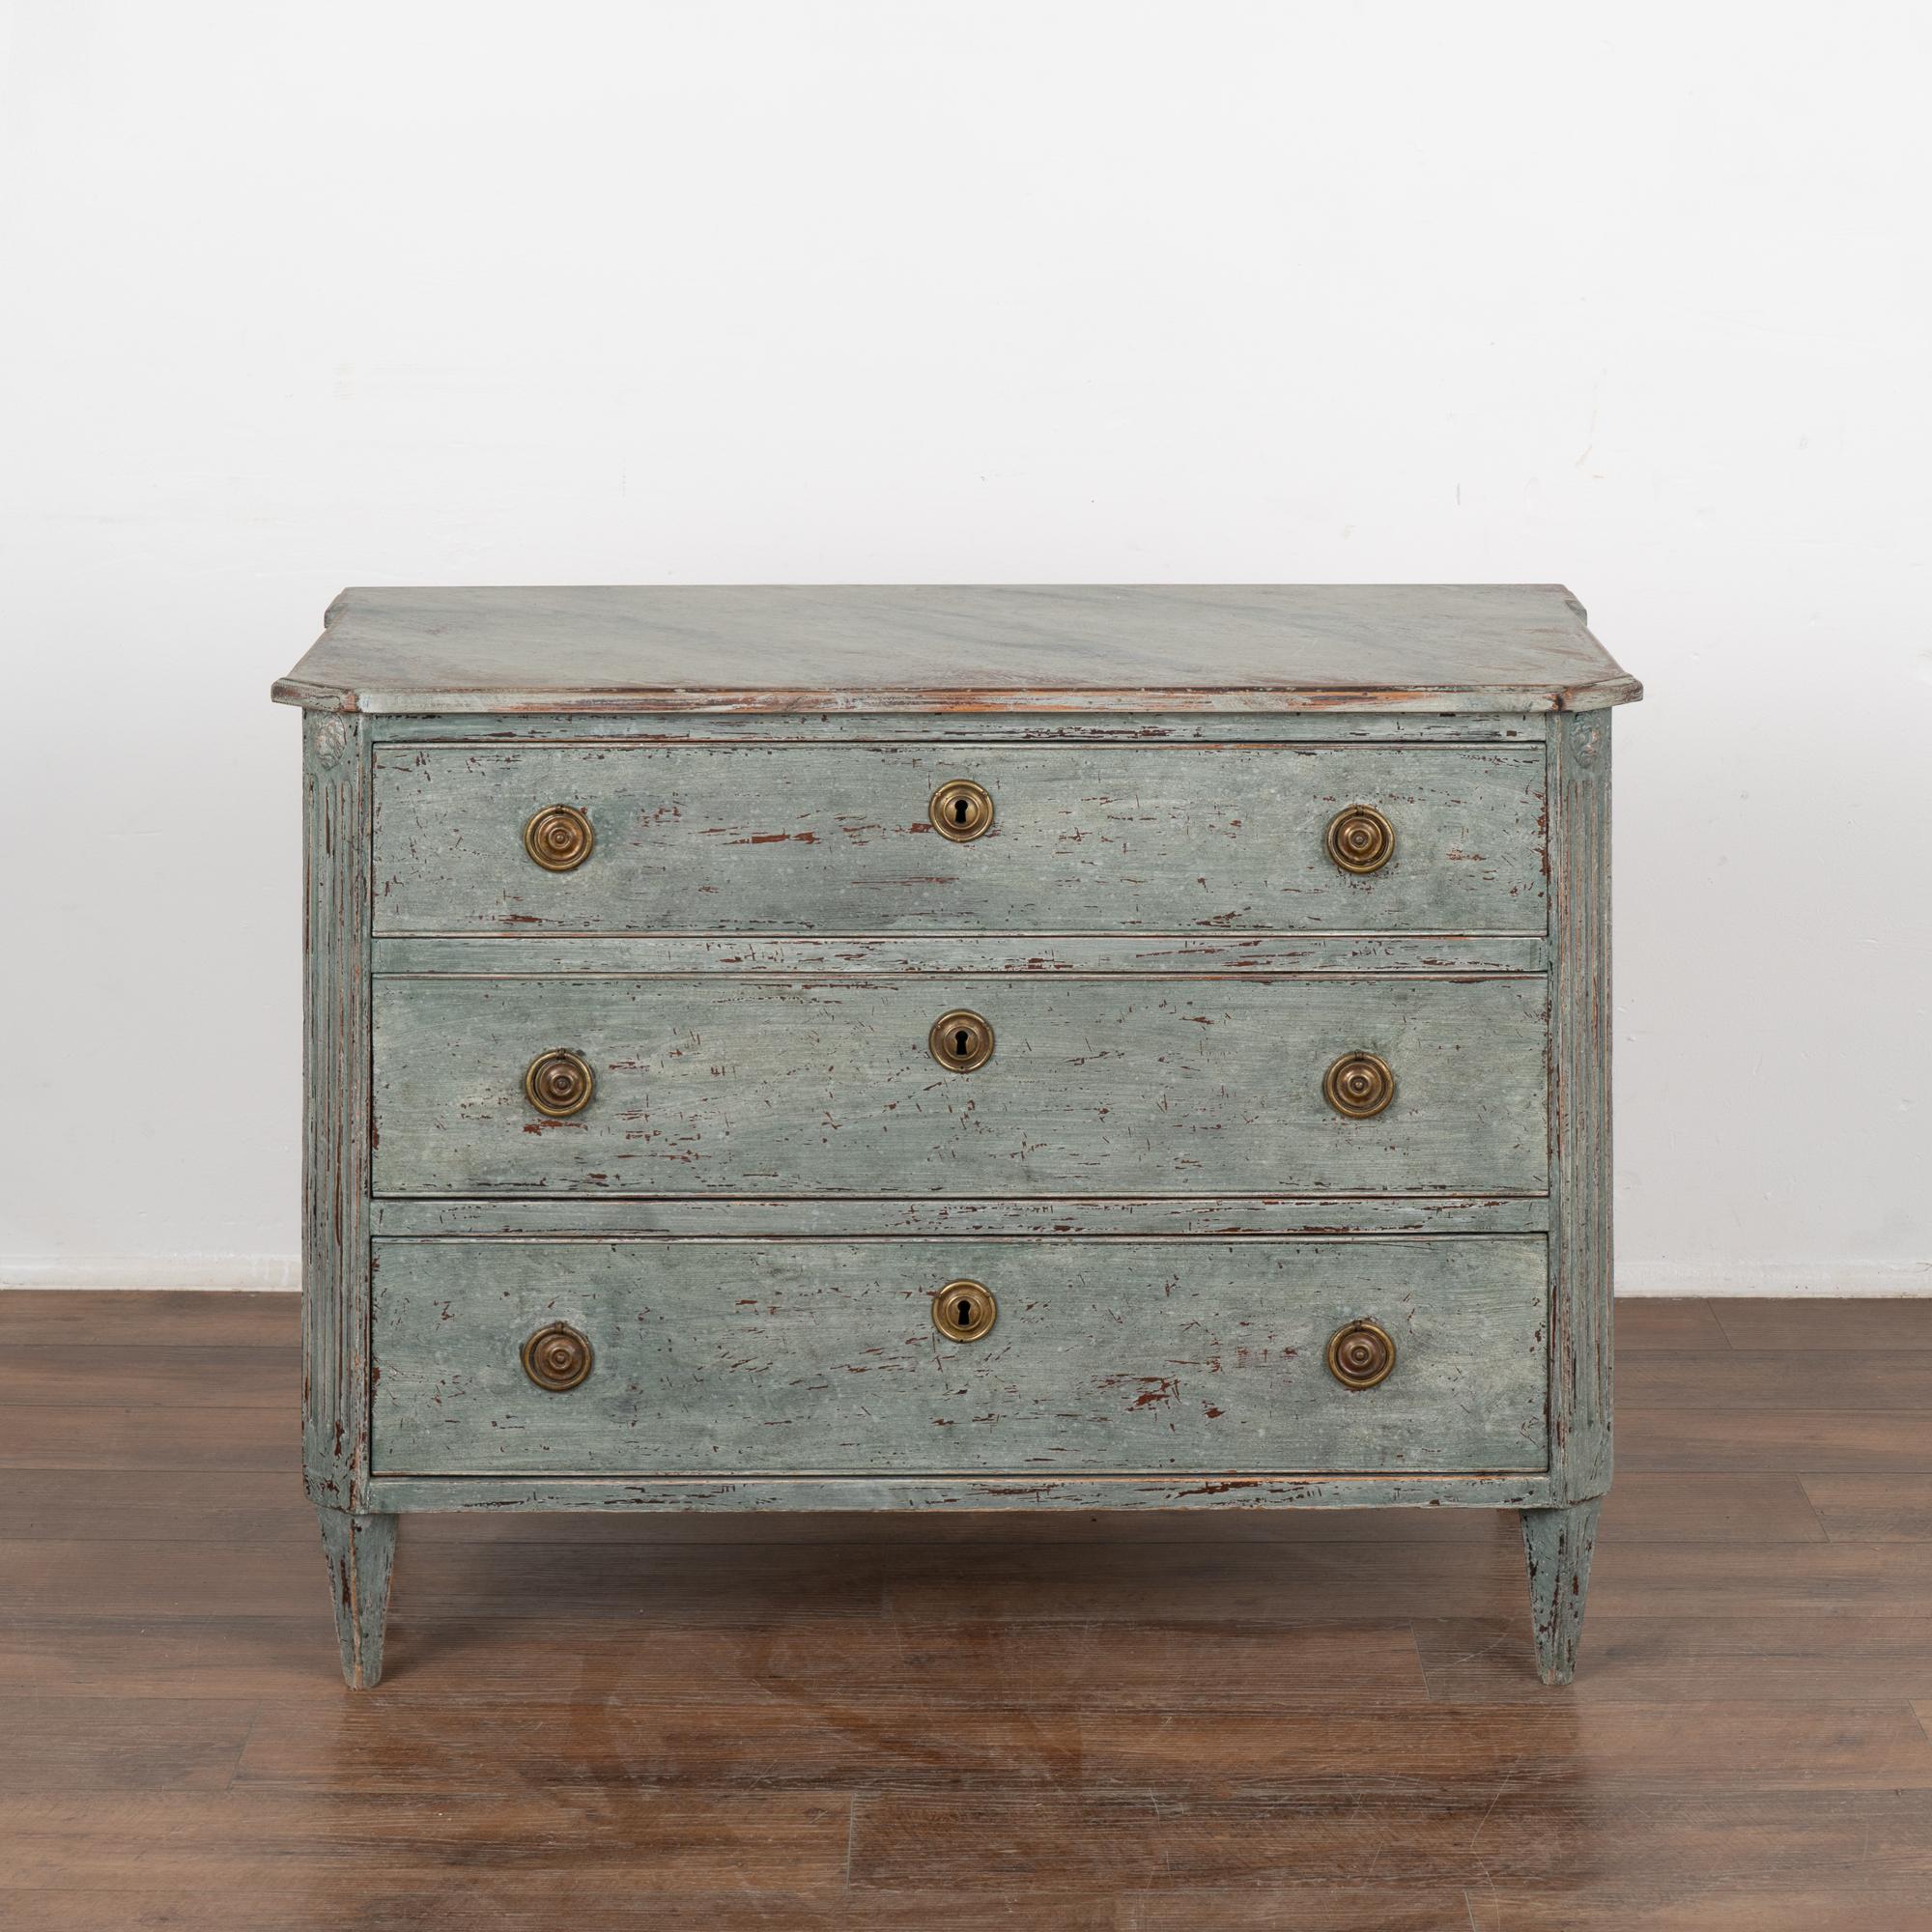 Swedish Blue Painted Chest of Three Drawers, Sweden circa 1820-40